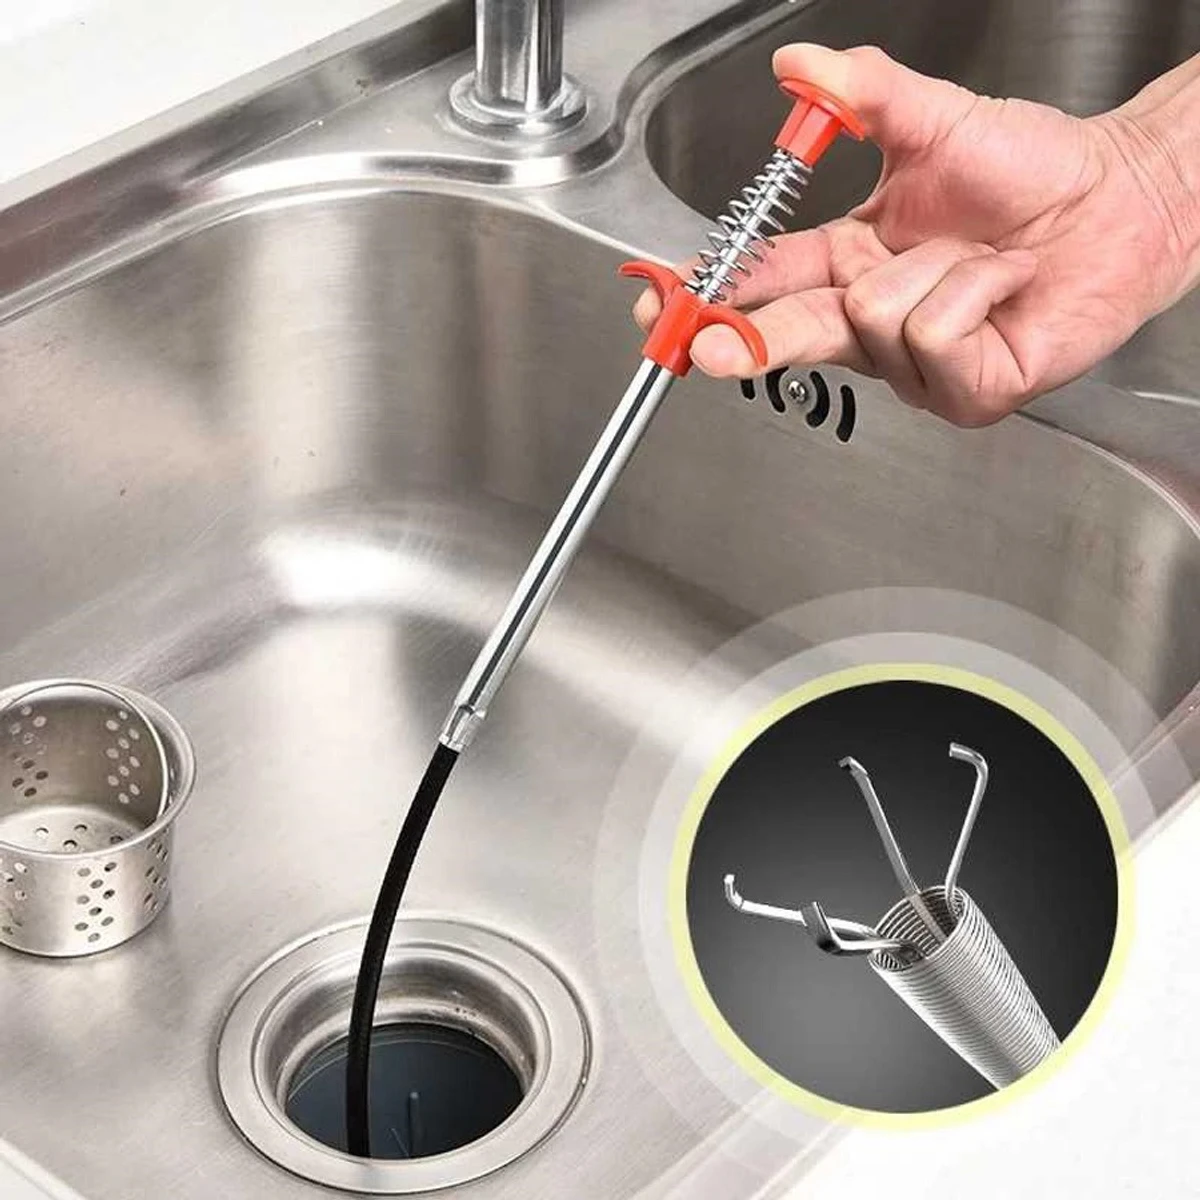 Drain Cleaning Spring Stick